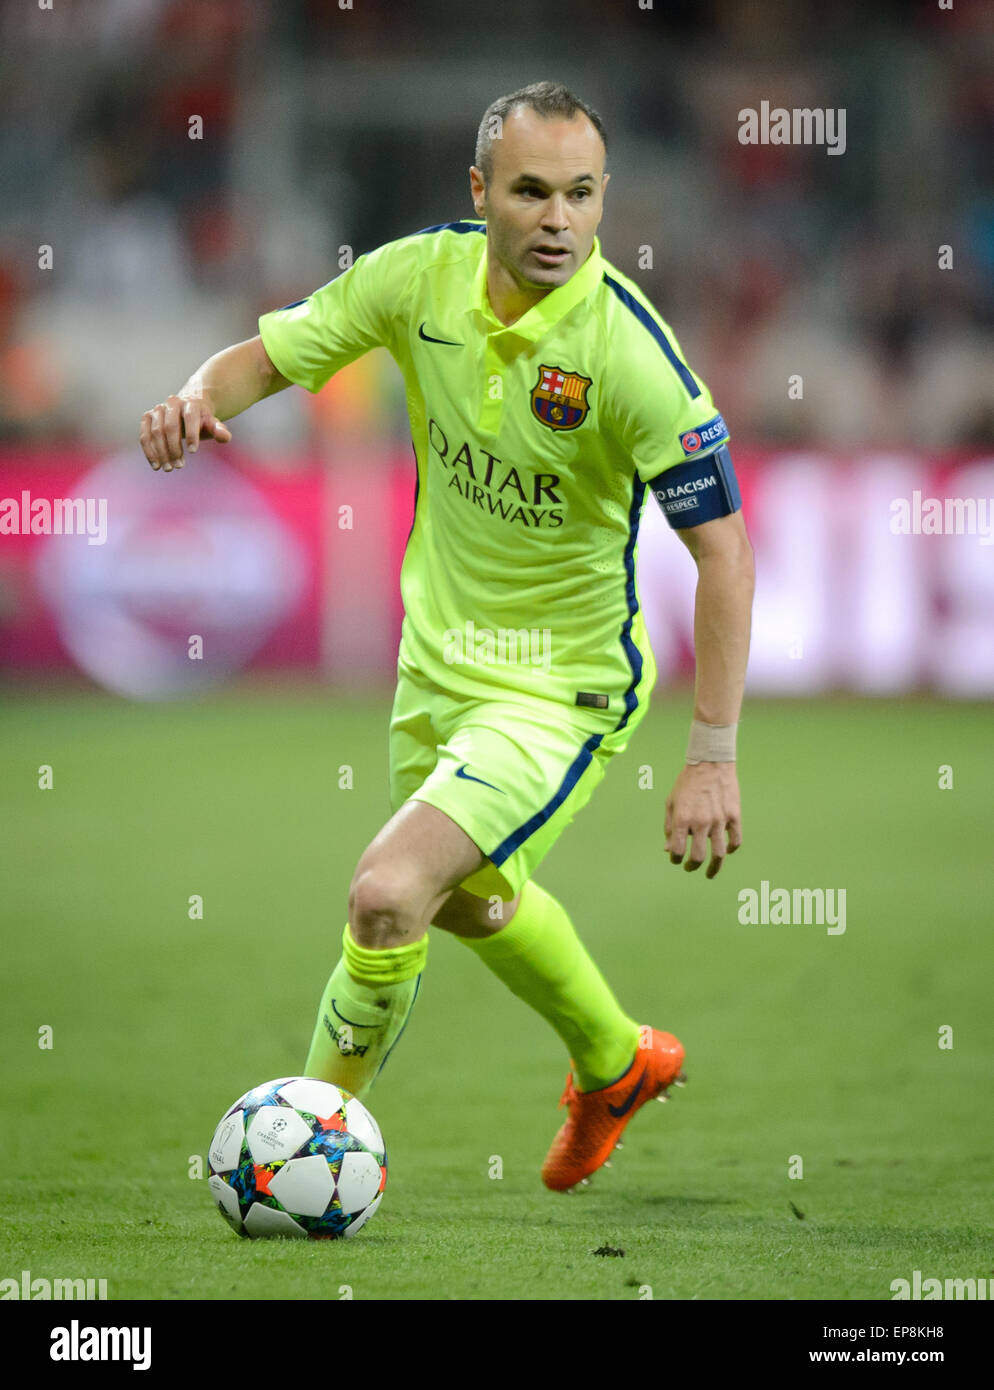 Barcelona's Andres Iniesta in action during the Champions League semi final match between FC Bayern Munich and FC Barcelona at Allianz Arena in Munich, Germany, 12 May 2015. Photo: Thomas Eisenhuth/dpa - NO WIRE SERVICE - Stock Photo